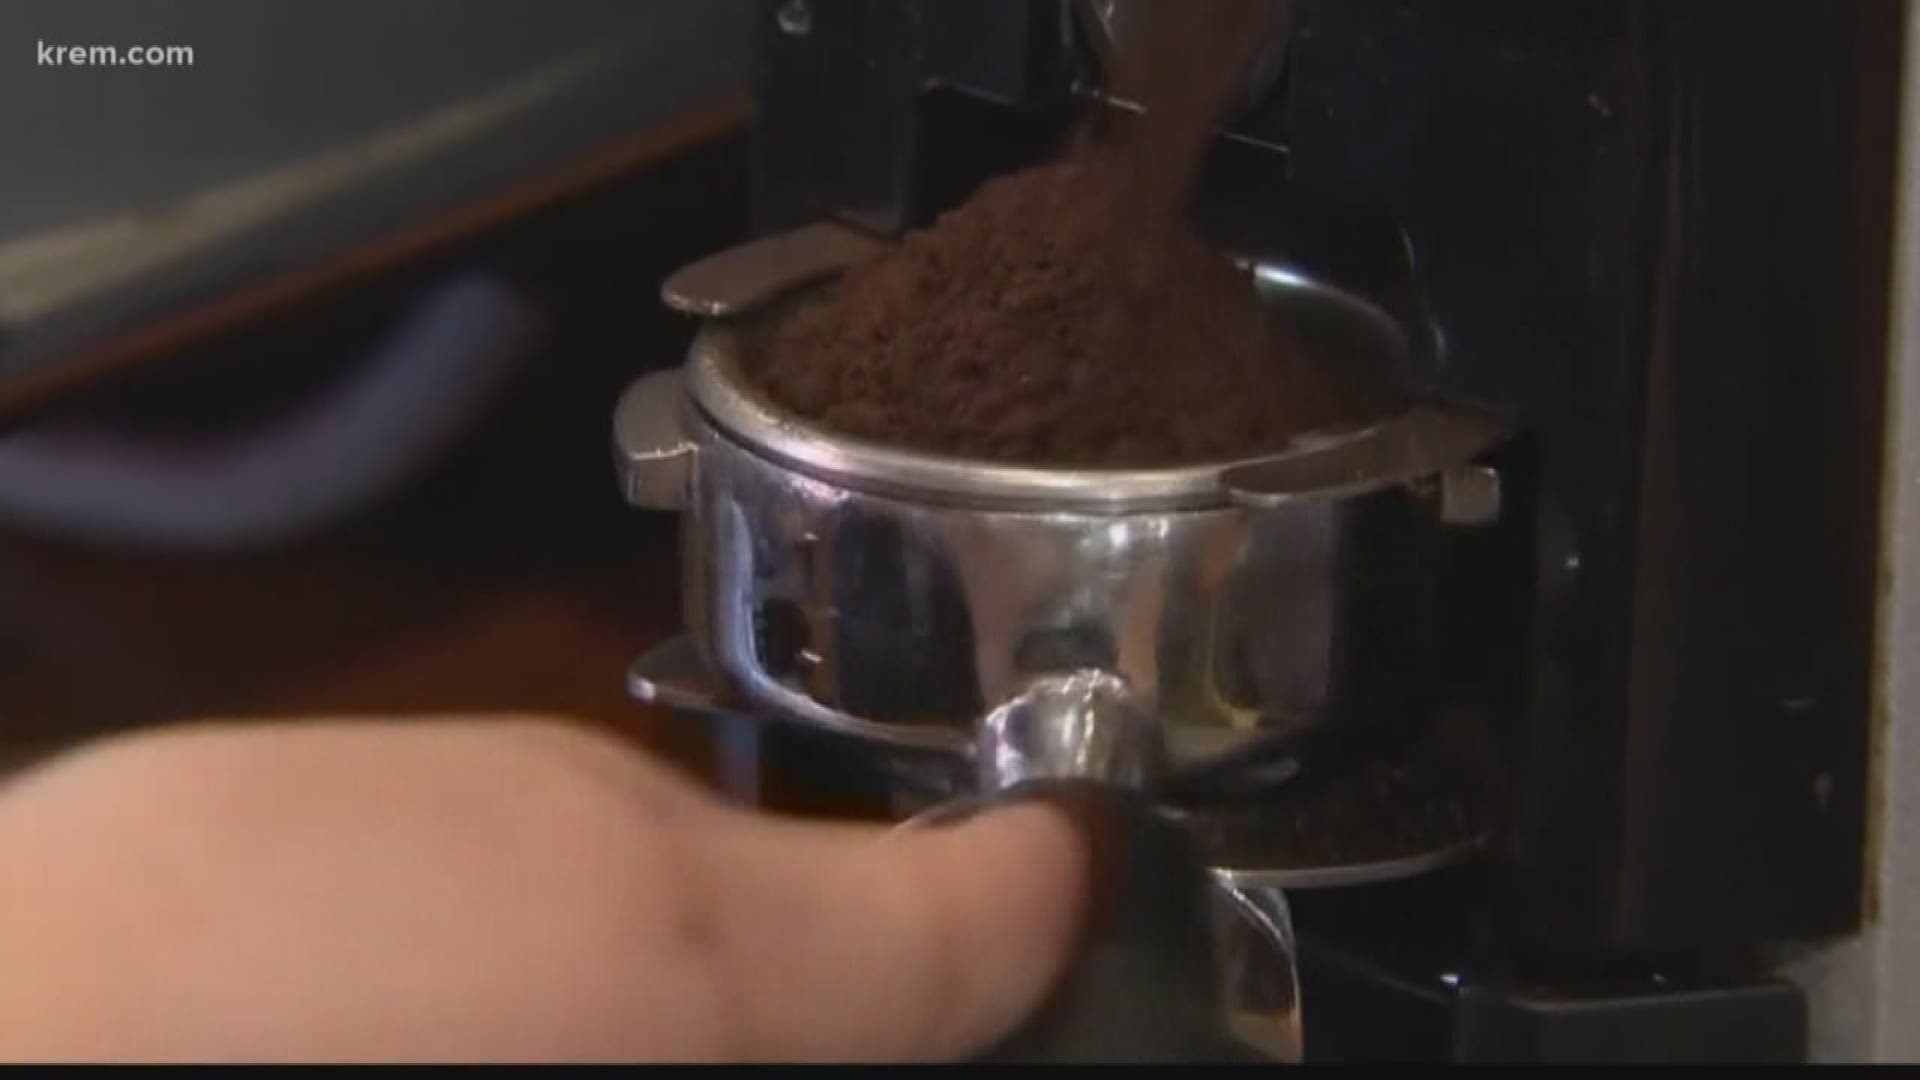 Study says drinking coffee is the key to living longer